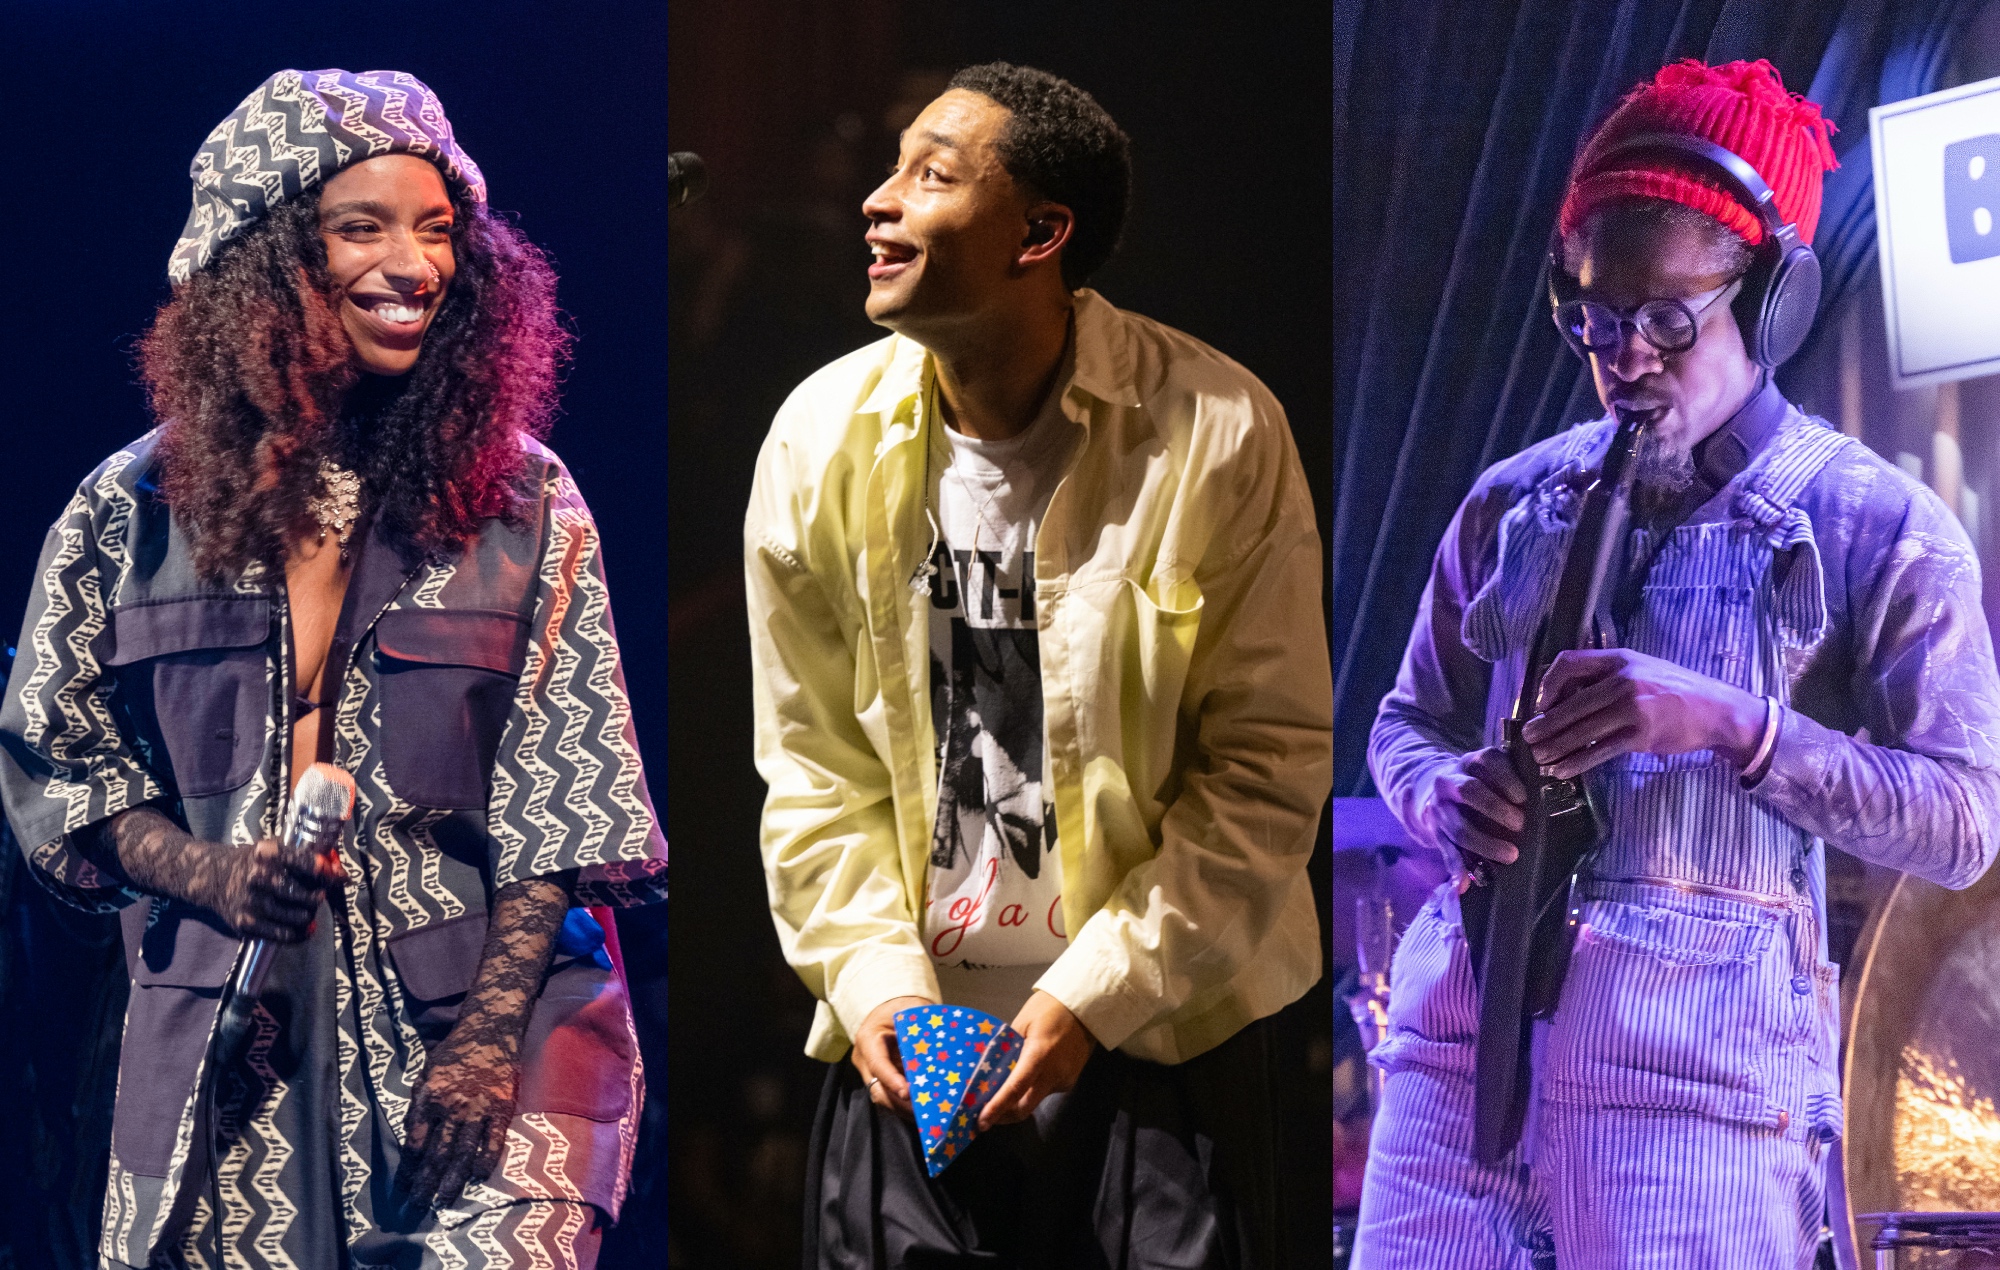 three side by side photographs of Lianne La Havas (left), Loyle Carner (centre) and André 3000 (right) performing live on stage